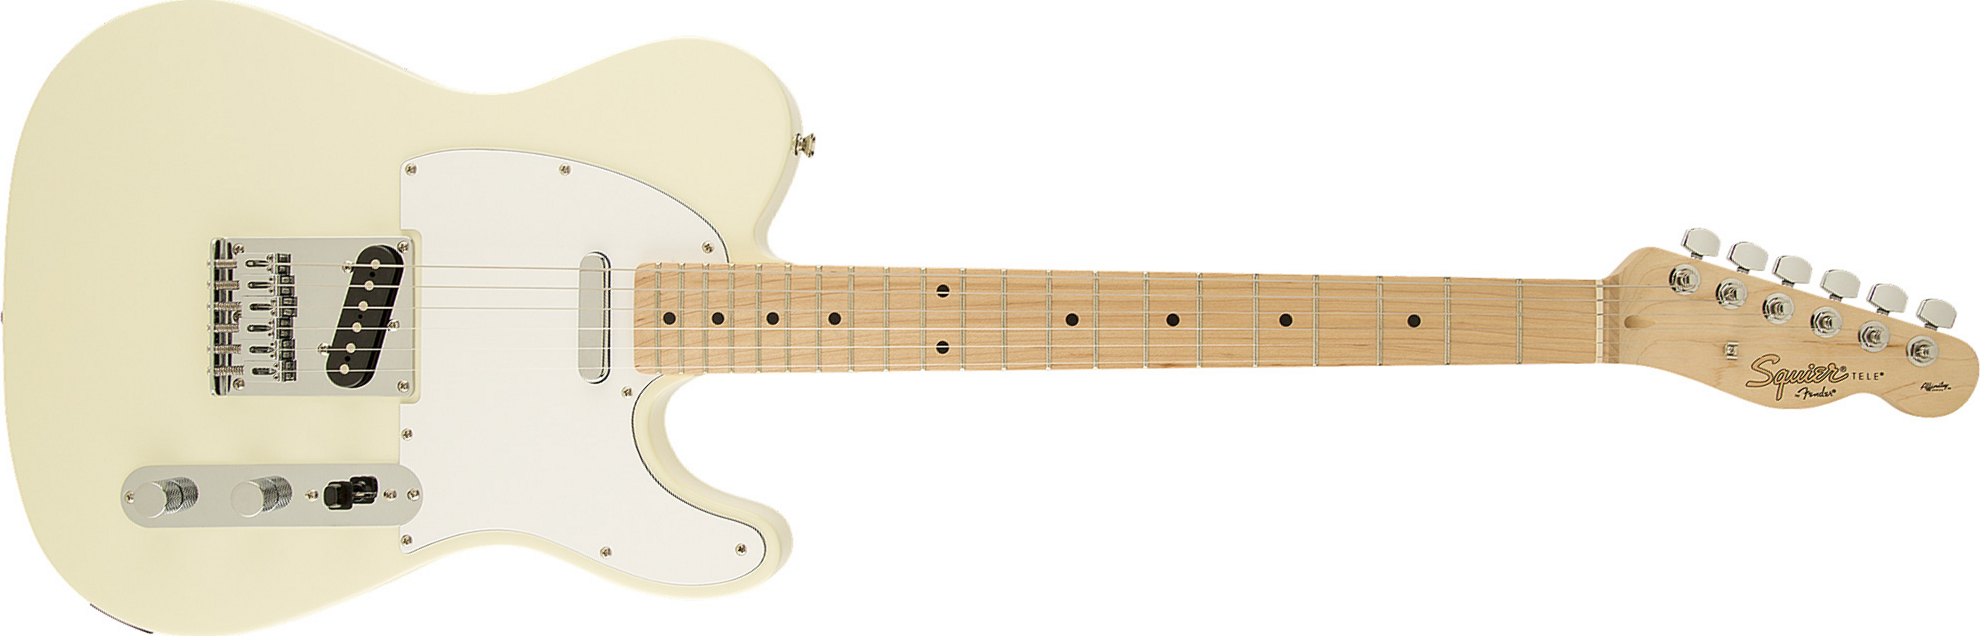 Squier Tele Affinity Series 2013 Mn - Arctic White - Tel shape electric guitar - Main picture